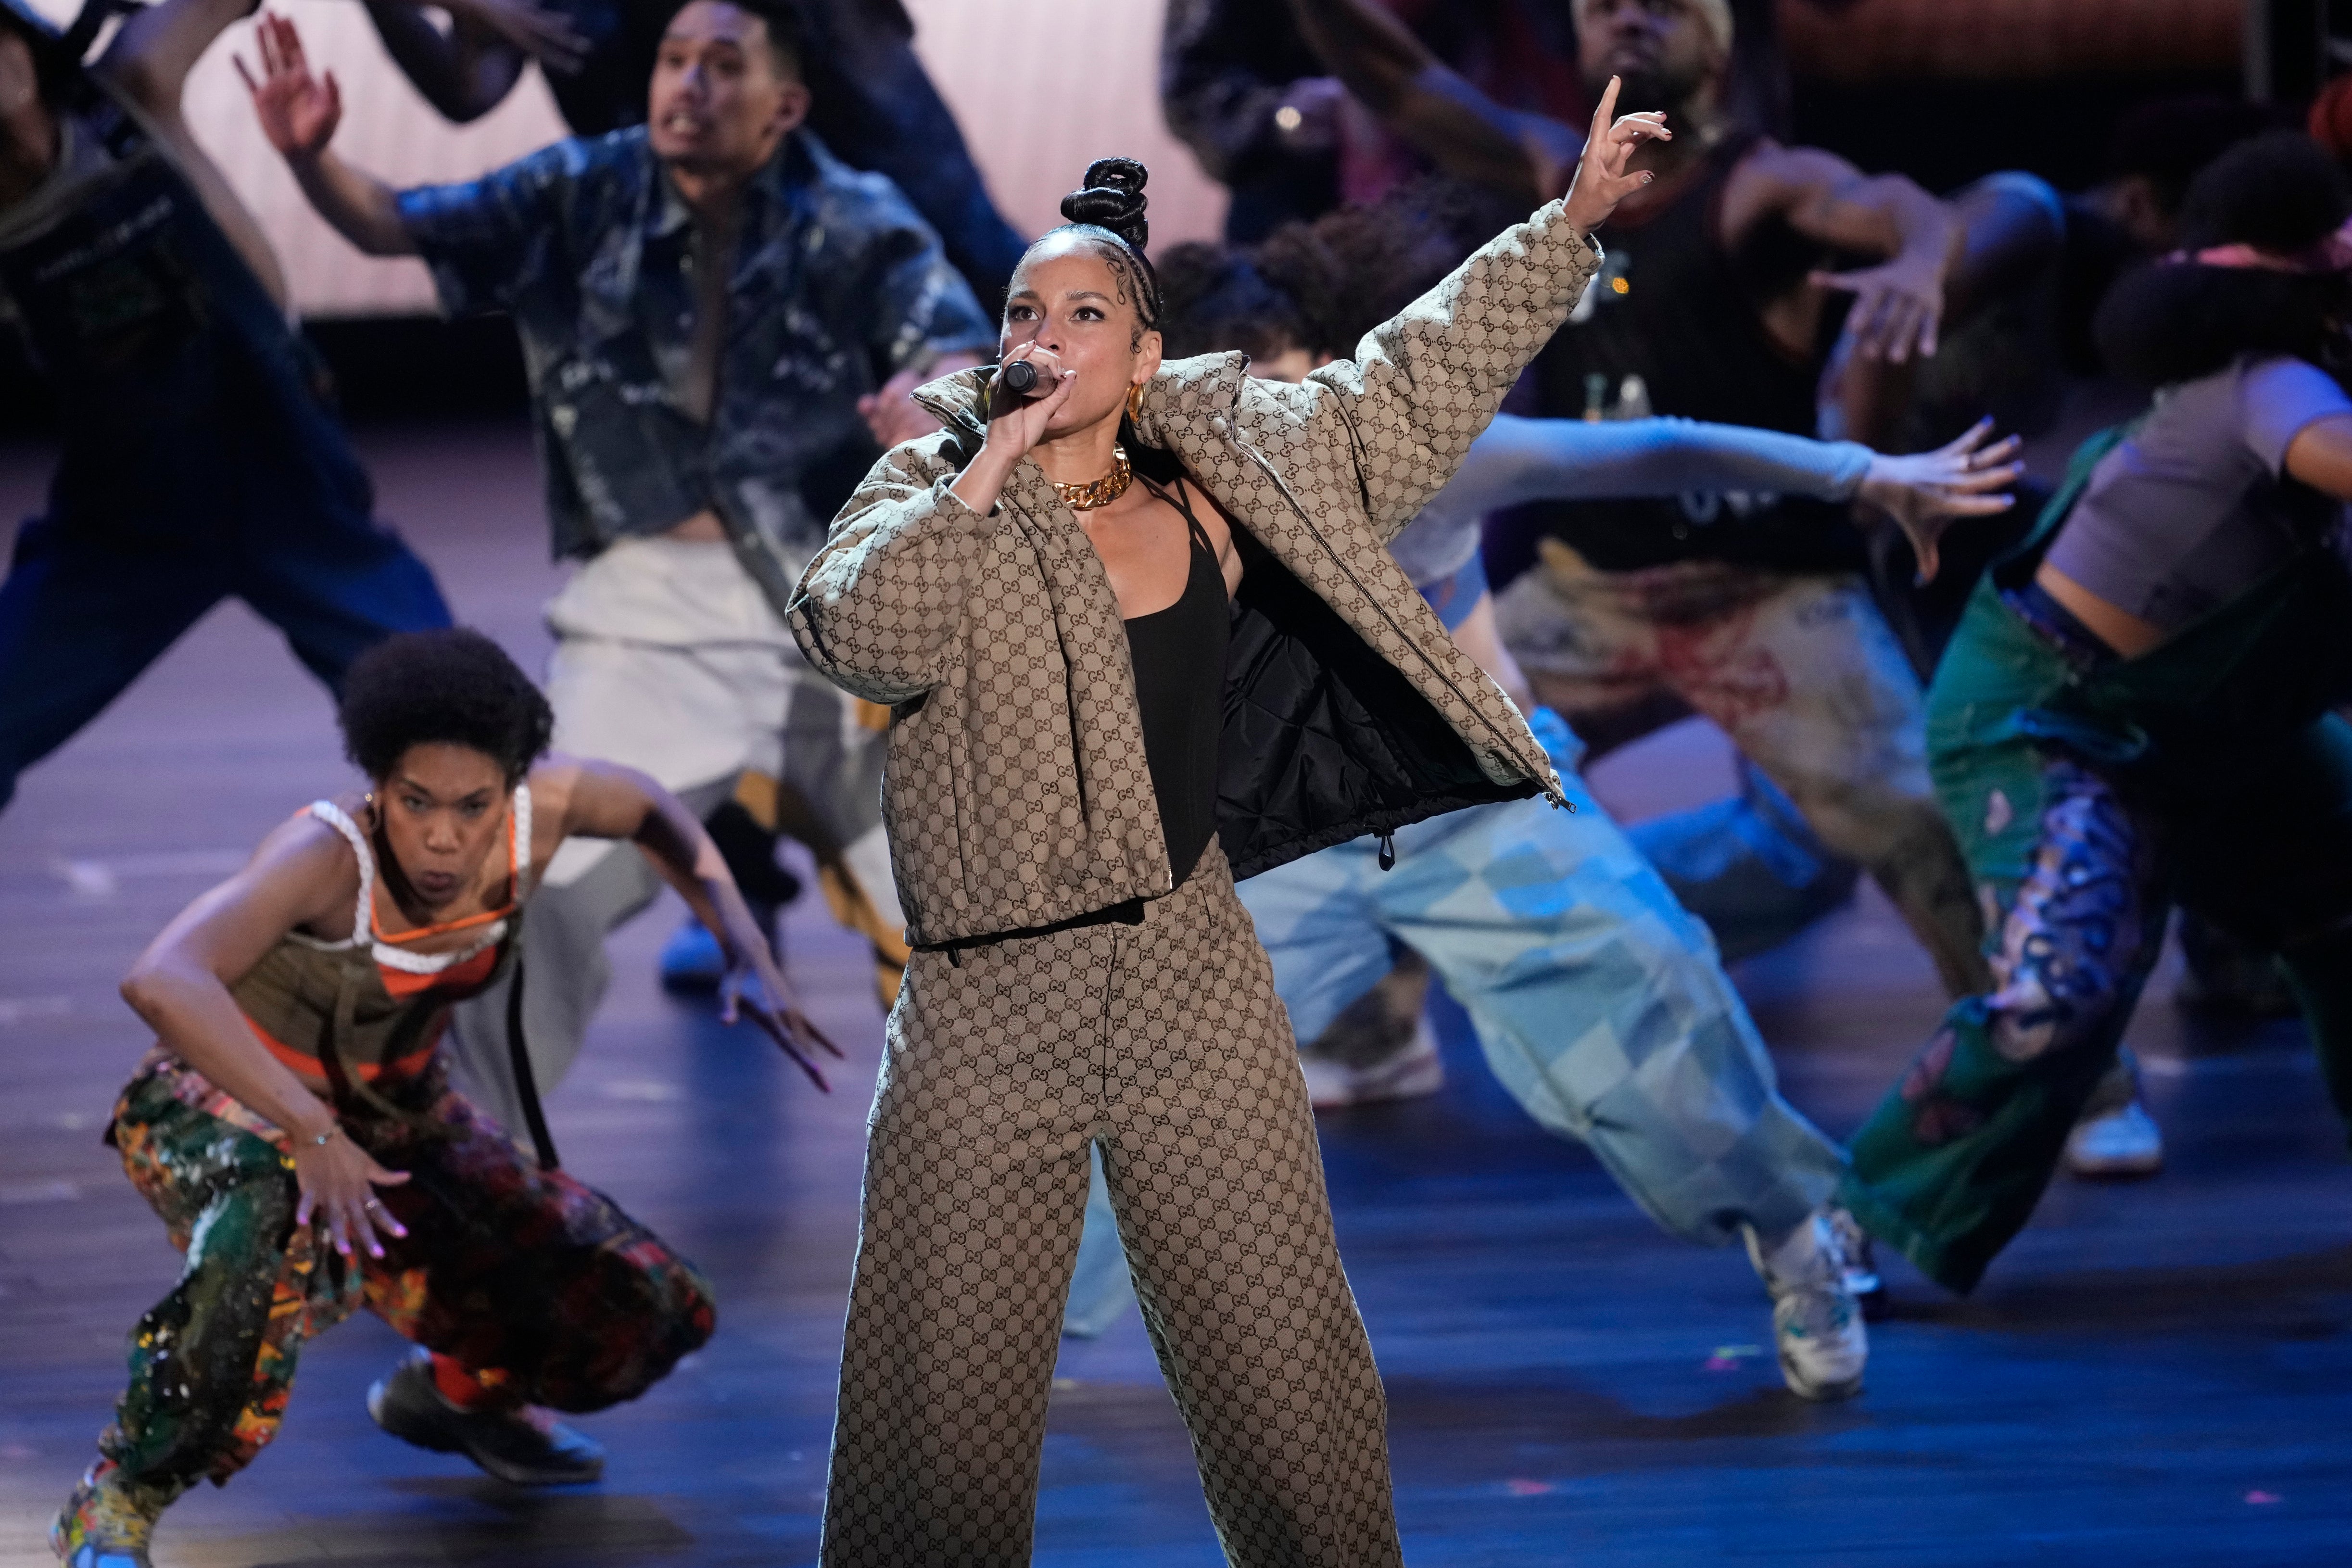 Alicia Keys performs with the “Hell’s Kitchen” cast during the Tony Awards on June 16